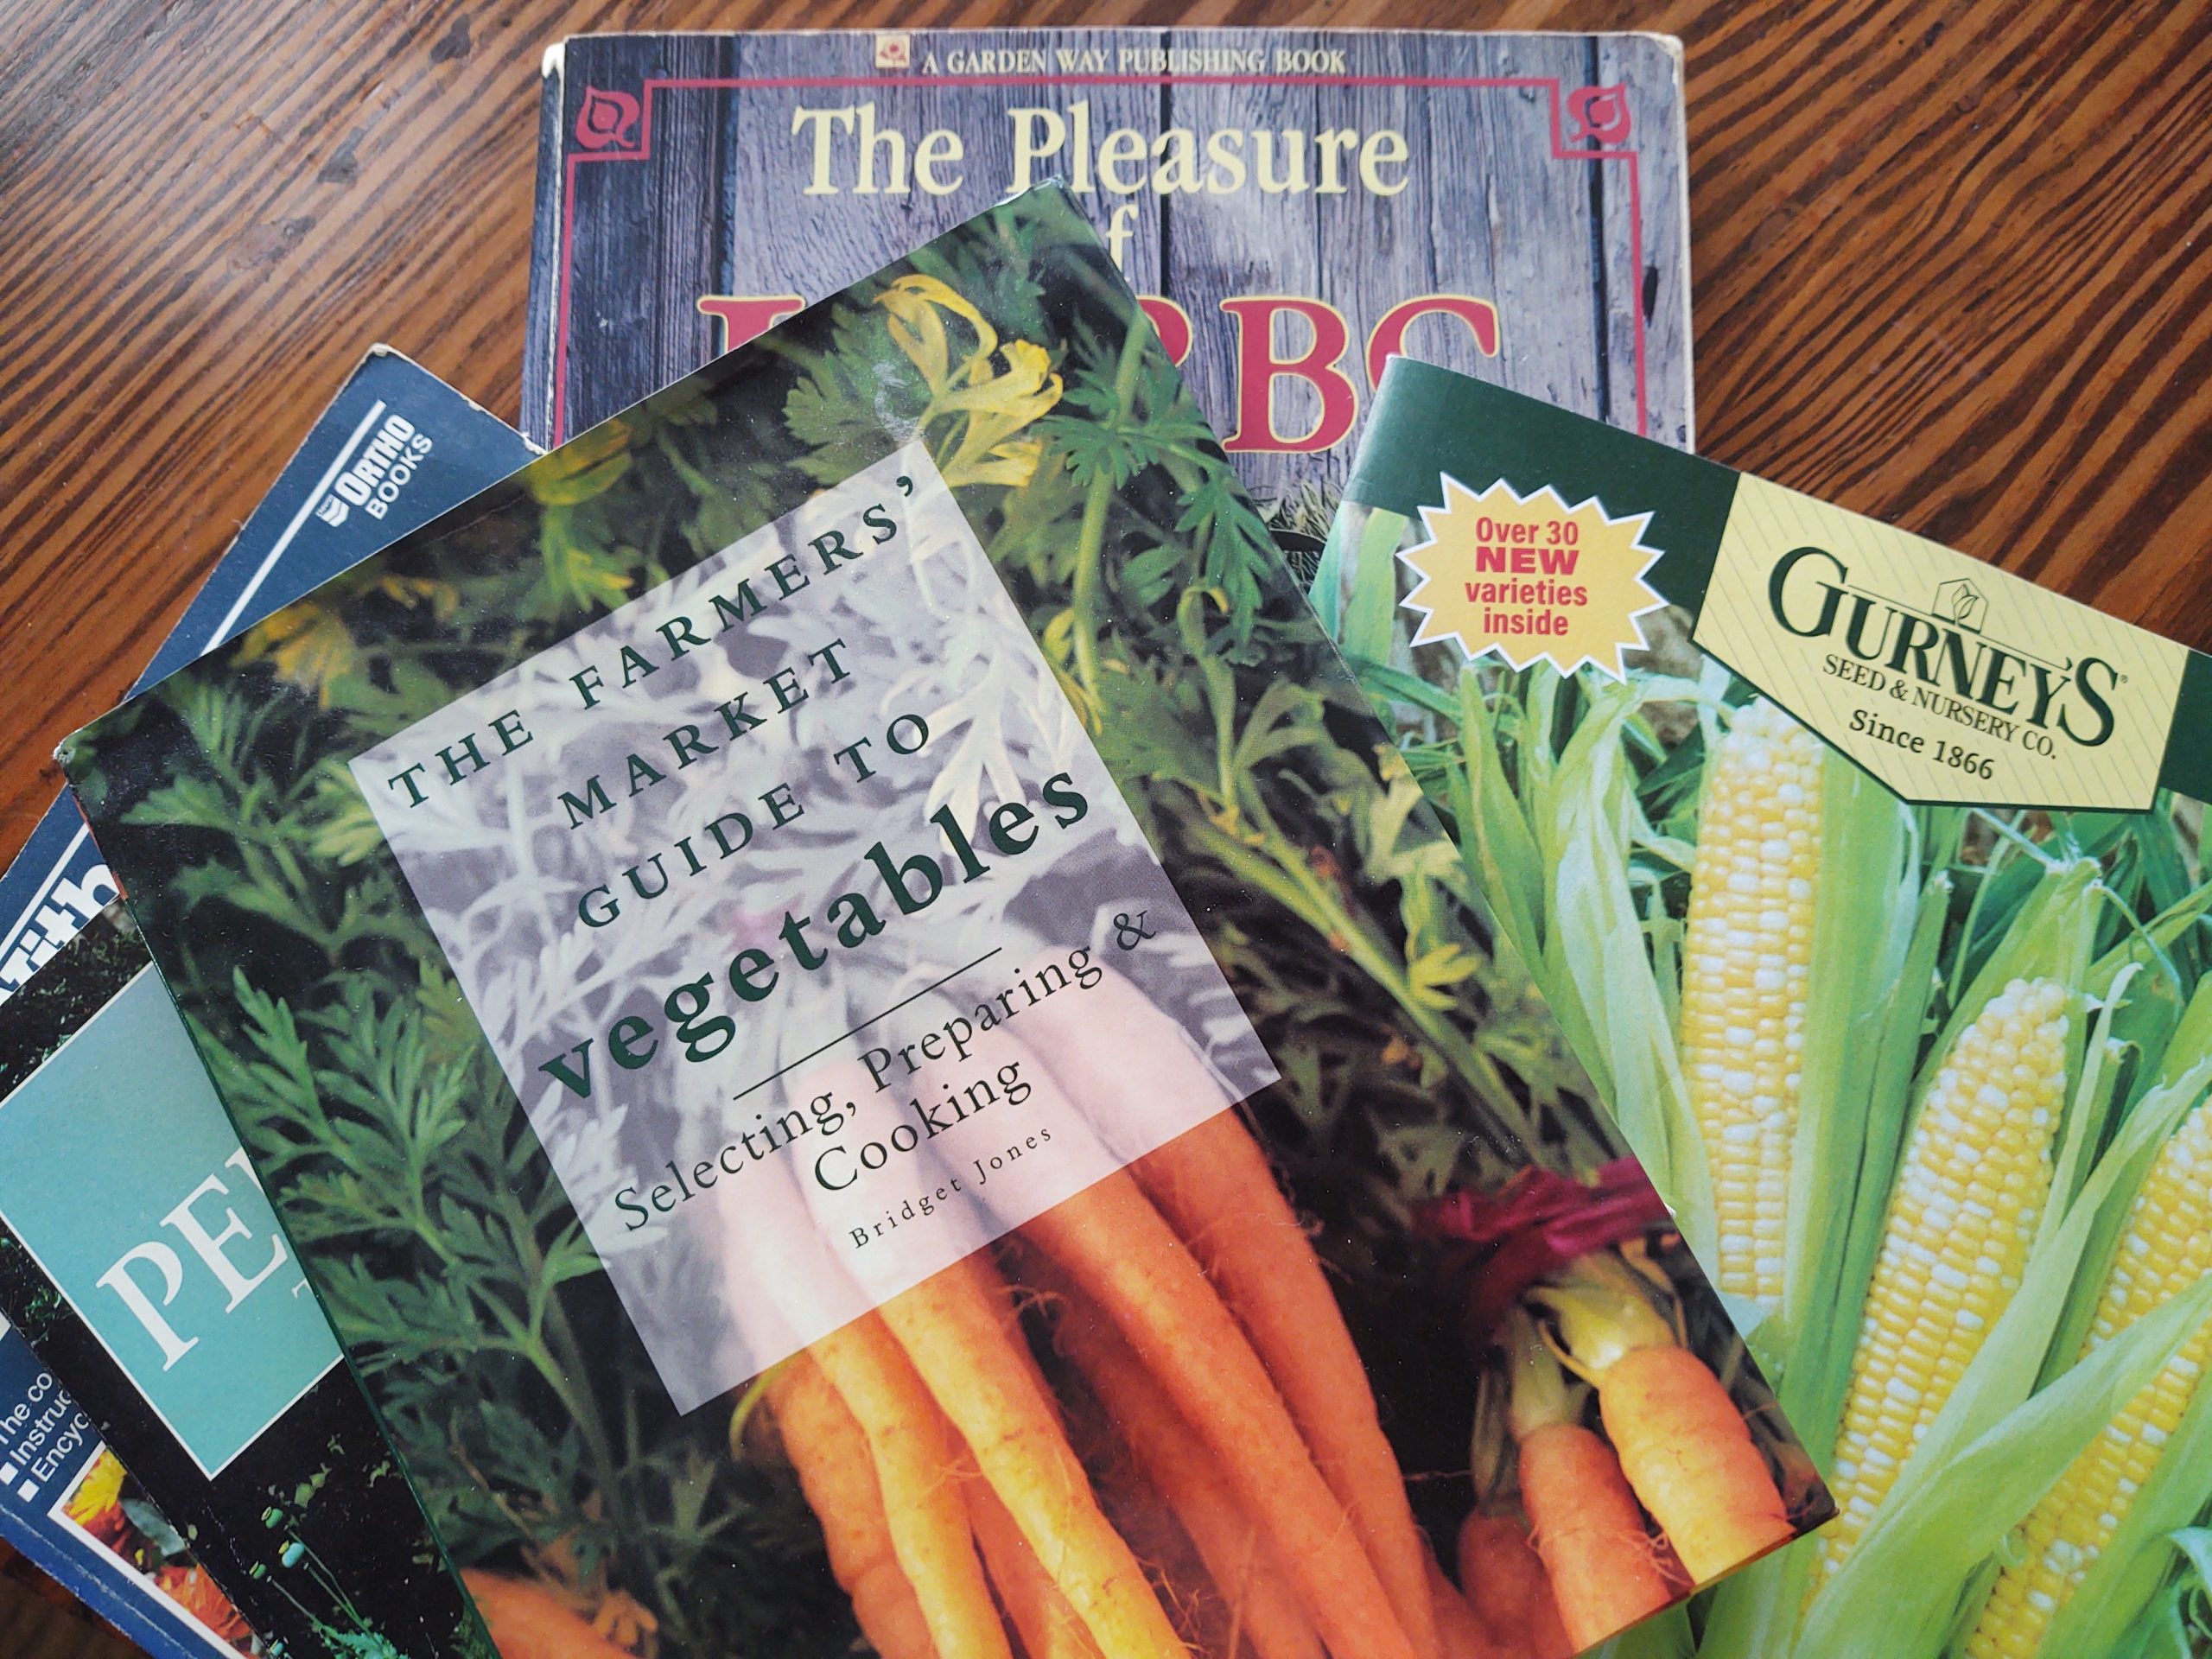 Image: Gardening catalogs and books